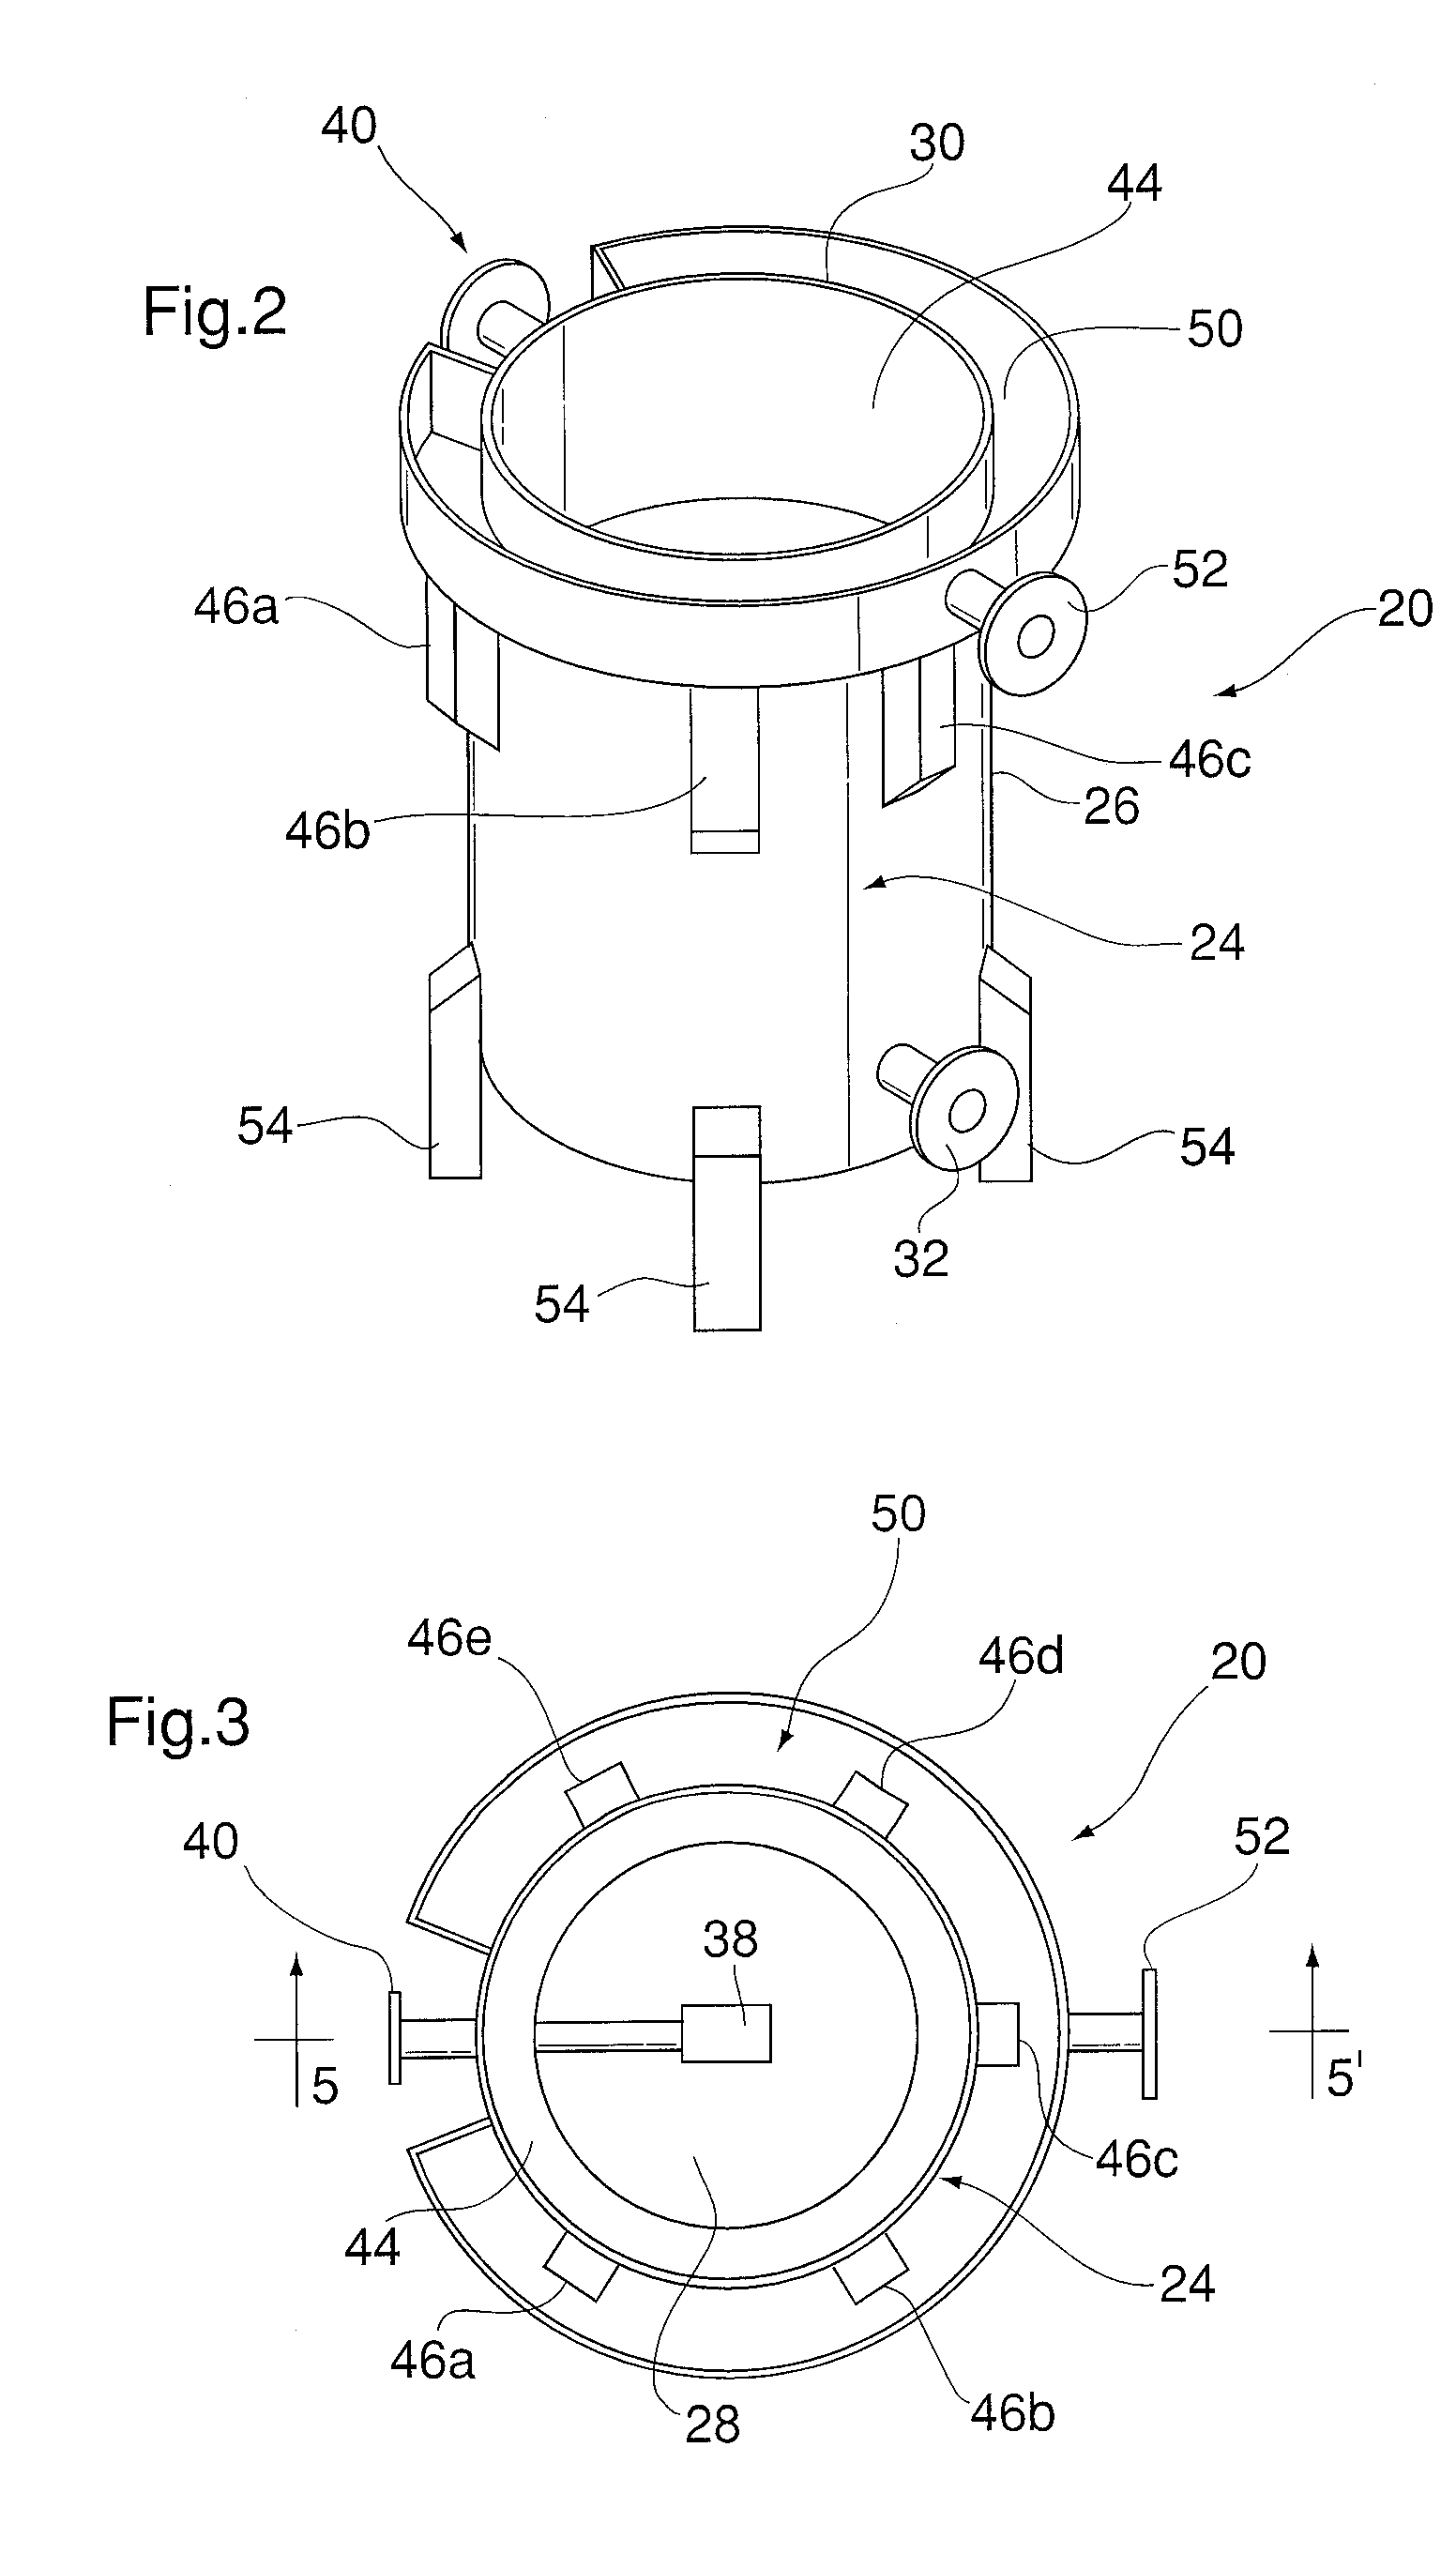 Apparatus for separating waste from cellulose fibres in paper recycling processes